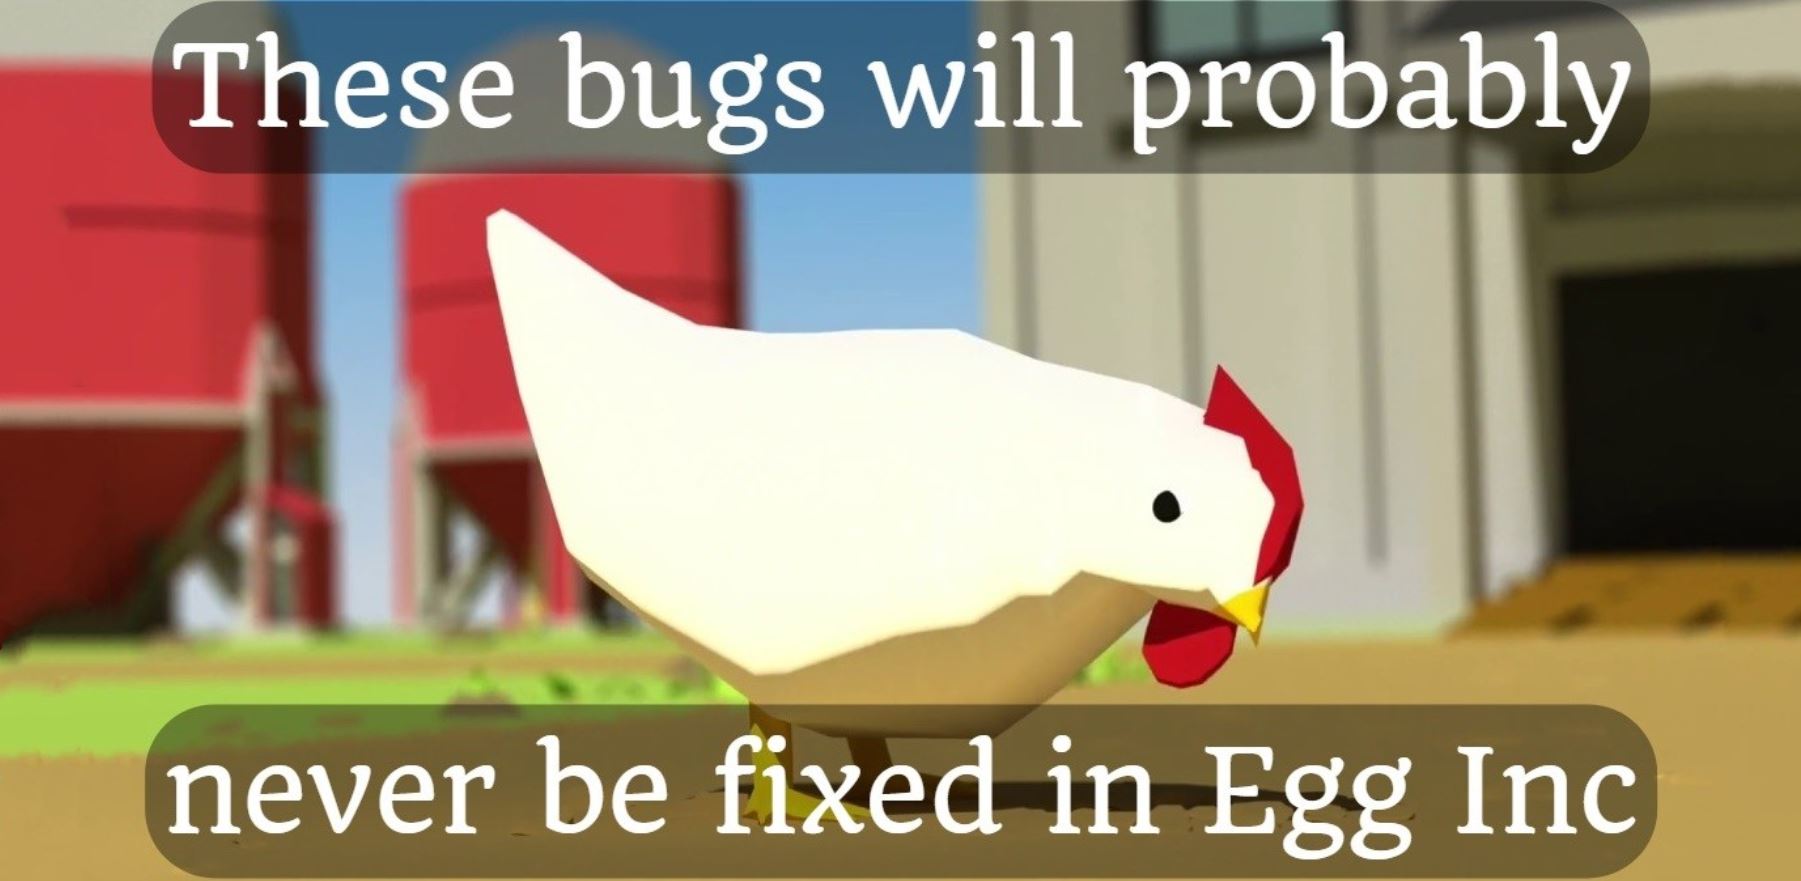 These bugs will probably never be fixed in Egg Inc